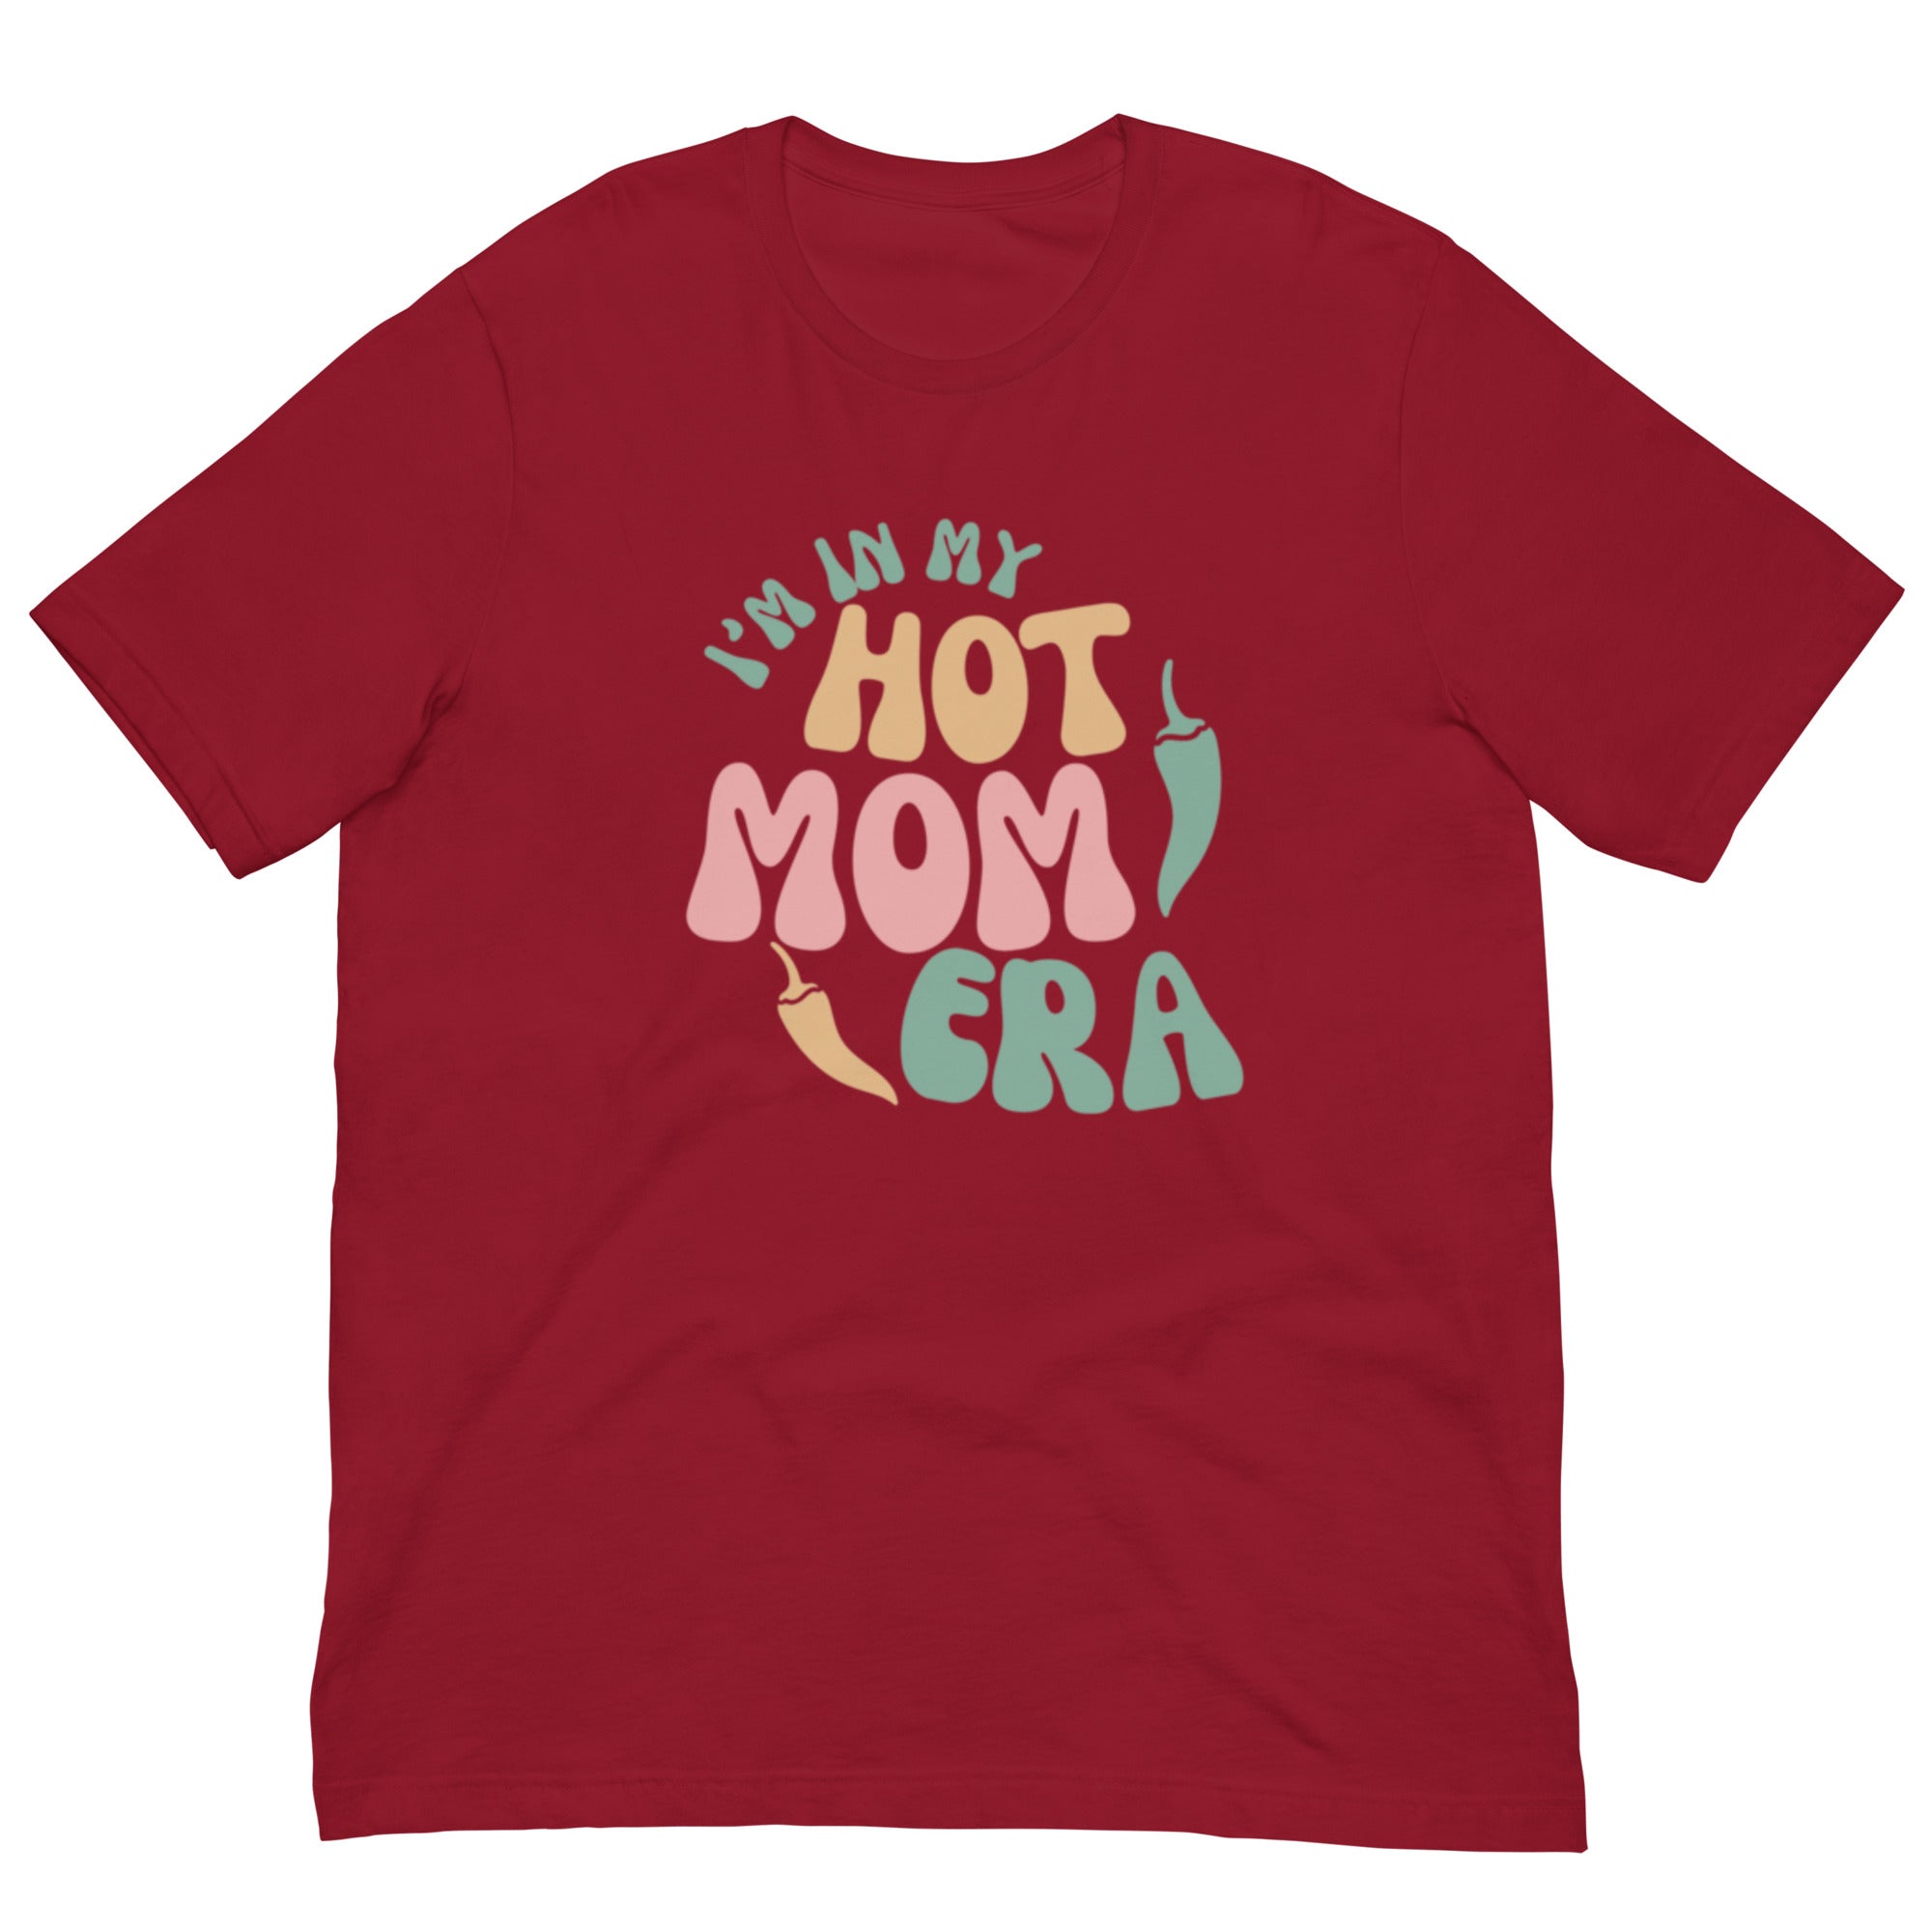 A red breathable Era Shirt with the phrase "in my hot mom era" printed in colorful, playful letters on the front.